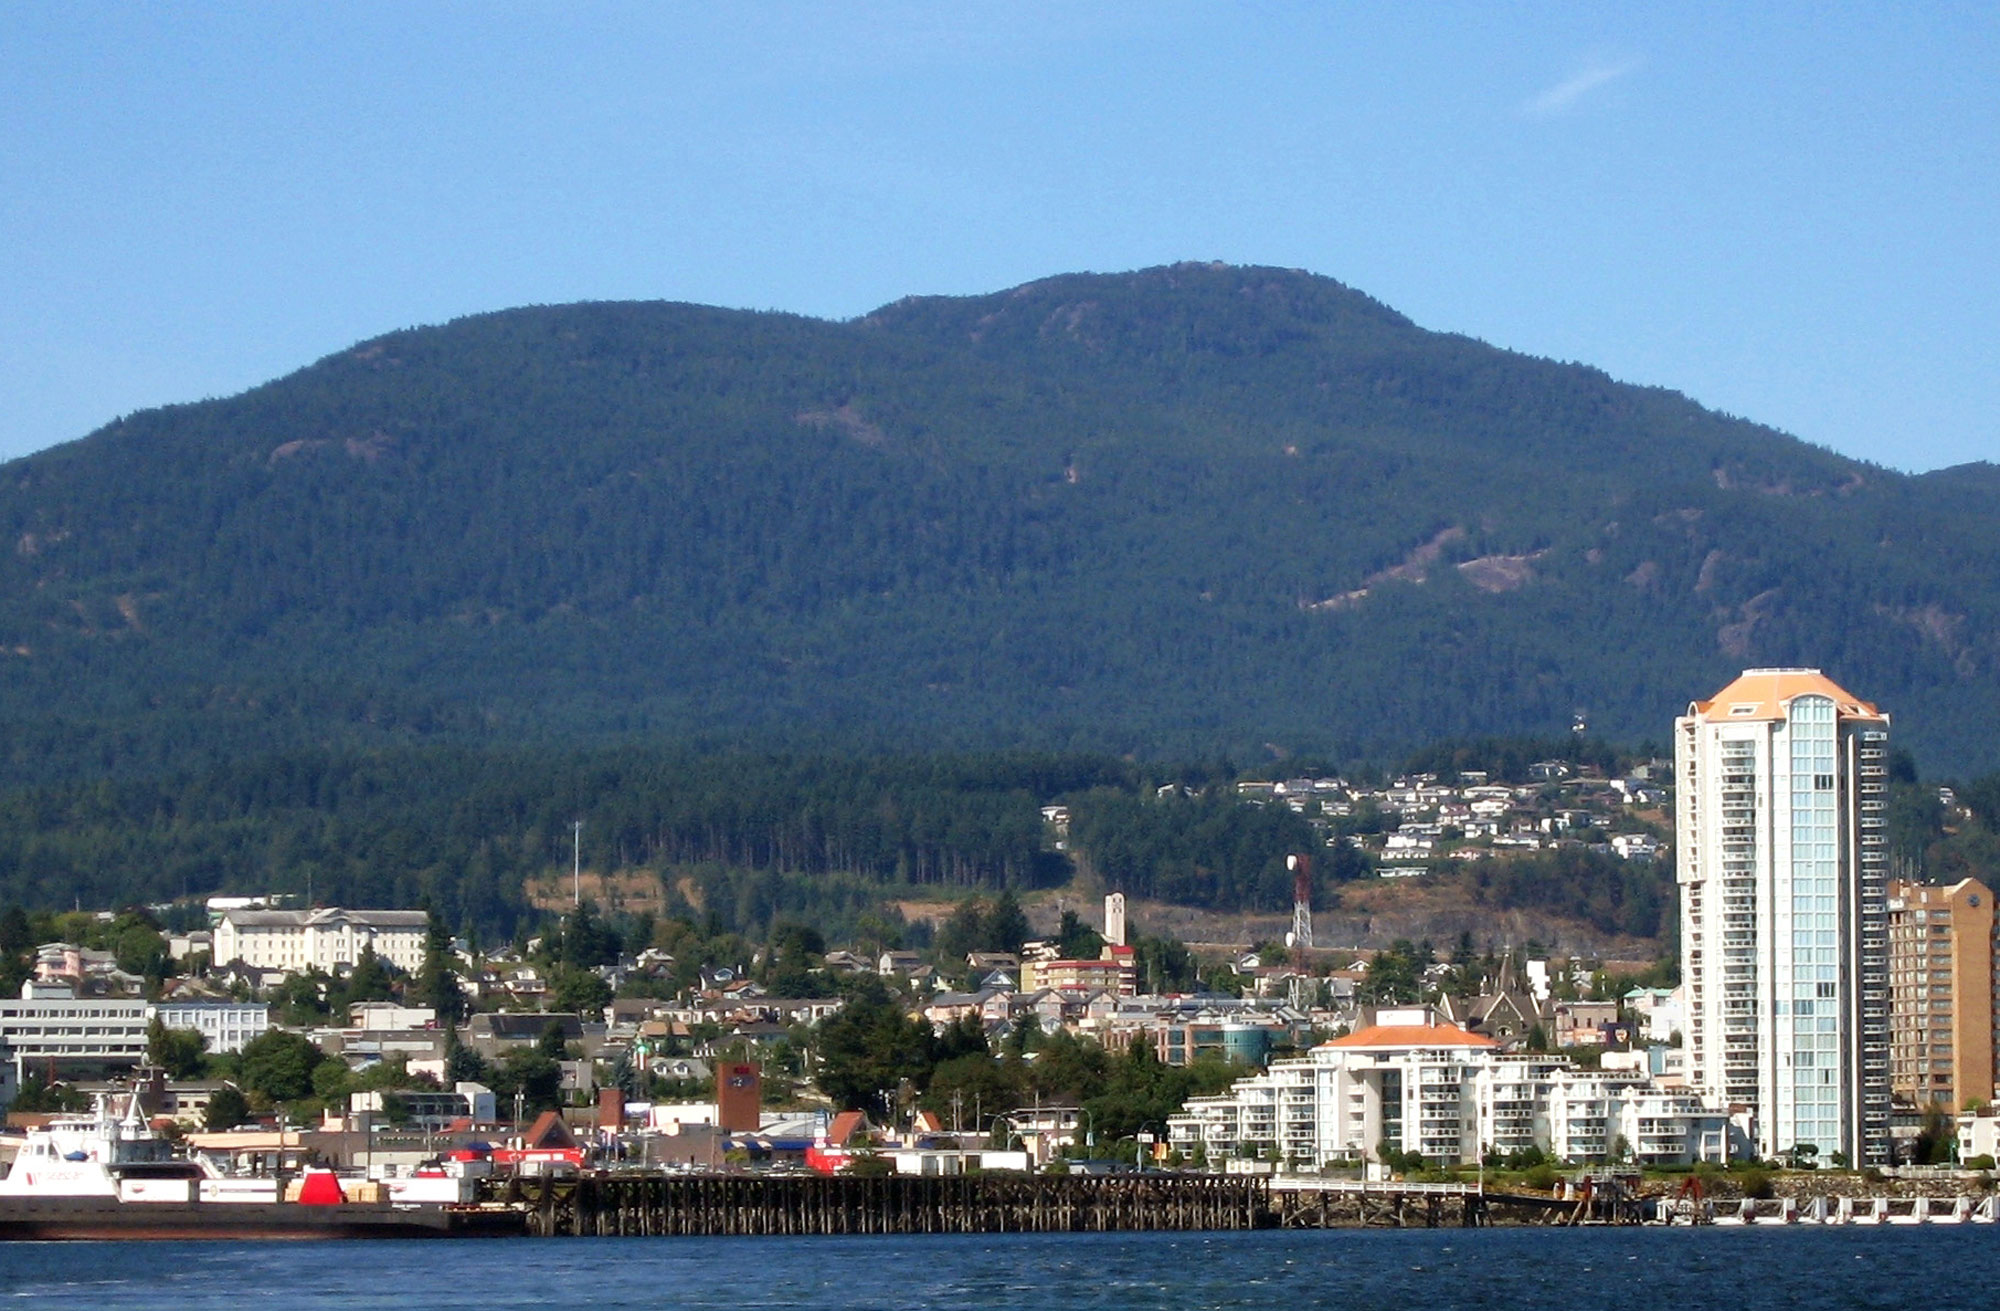 Nanaimo commercial real estate for sale, businesses for sale